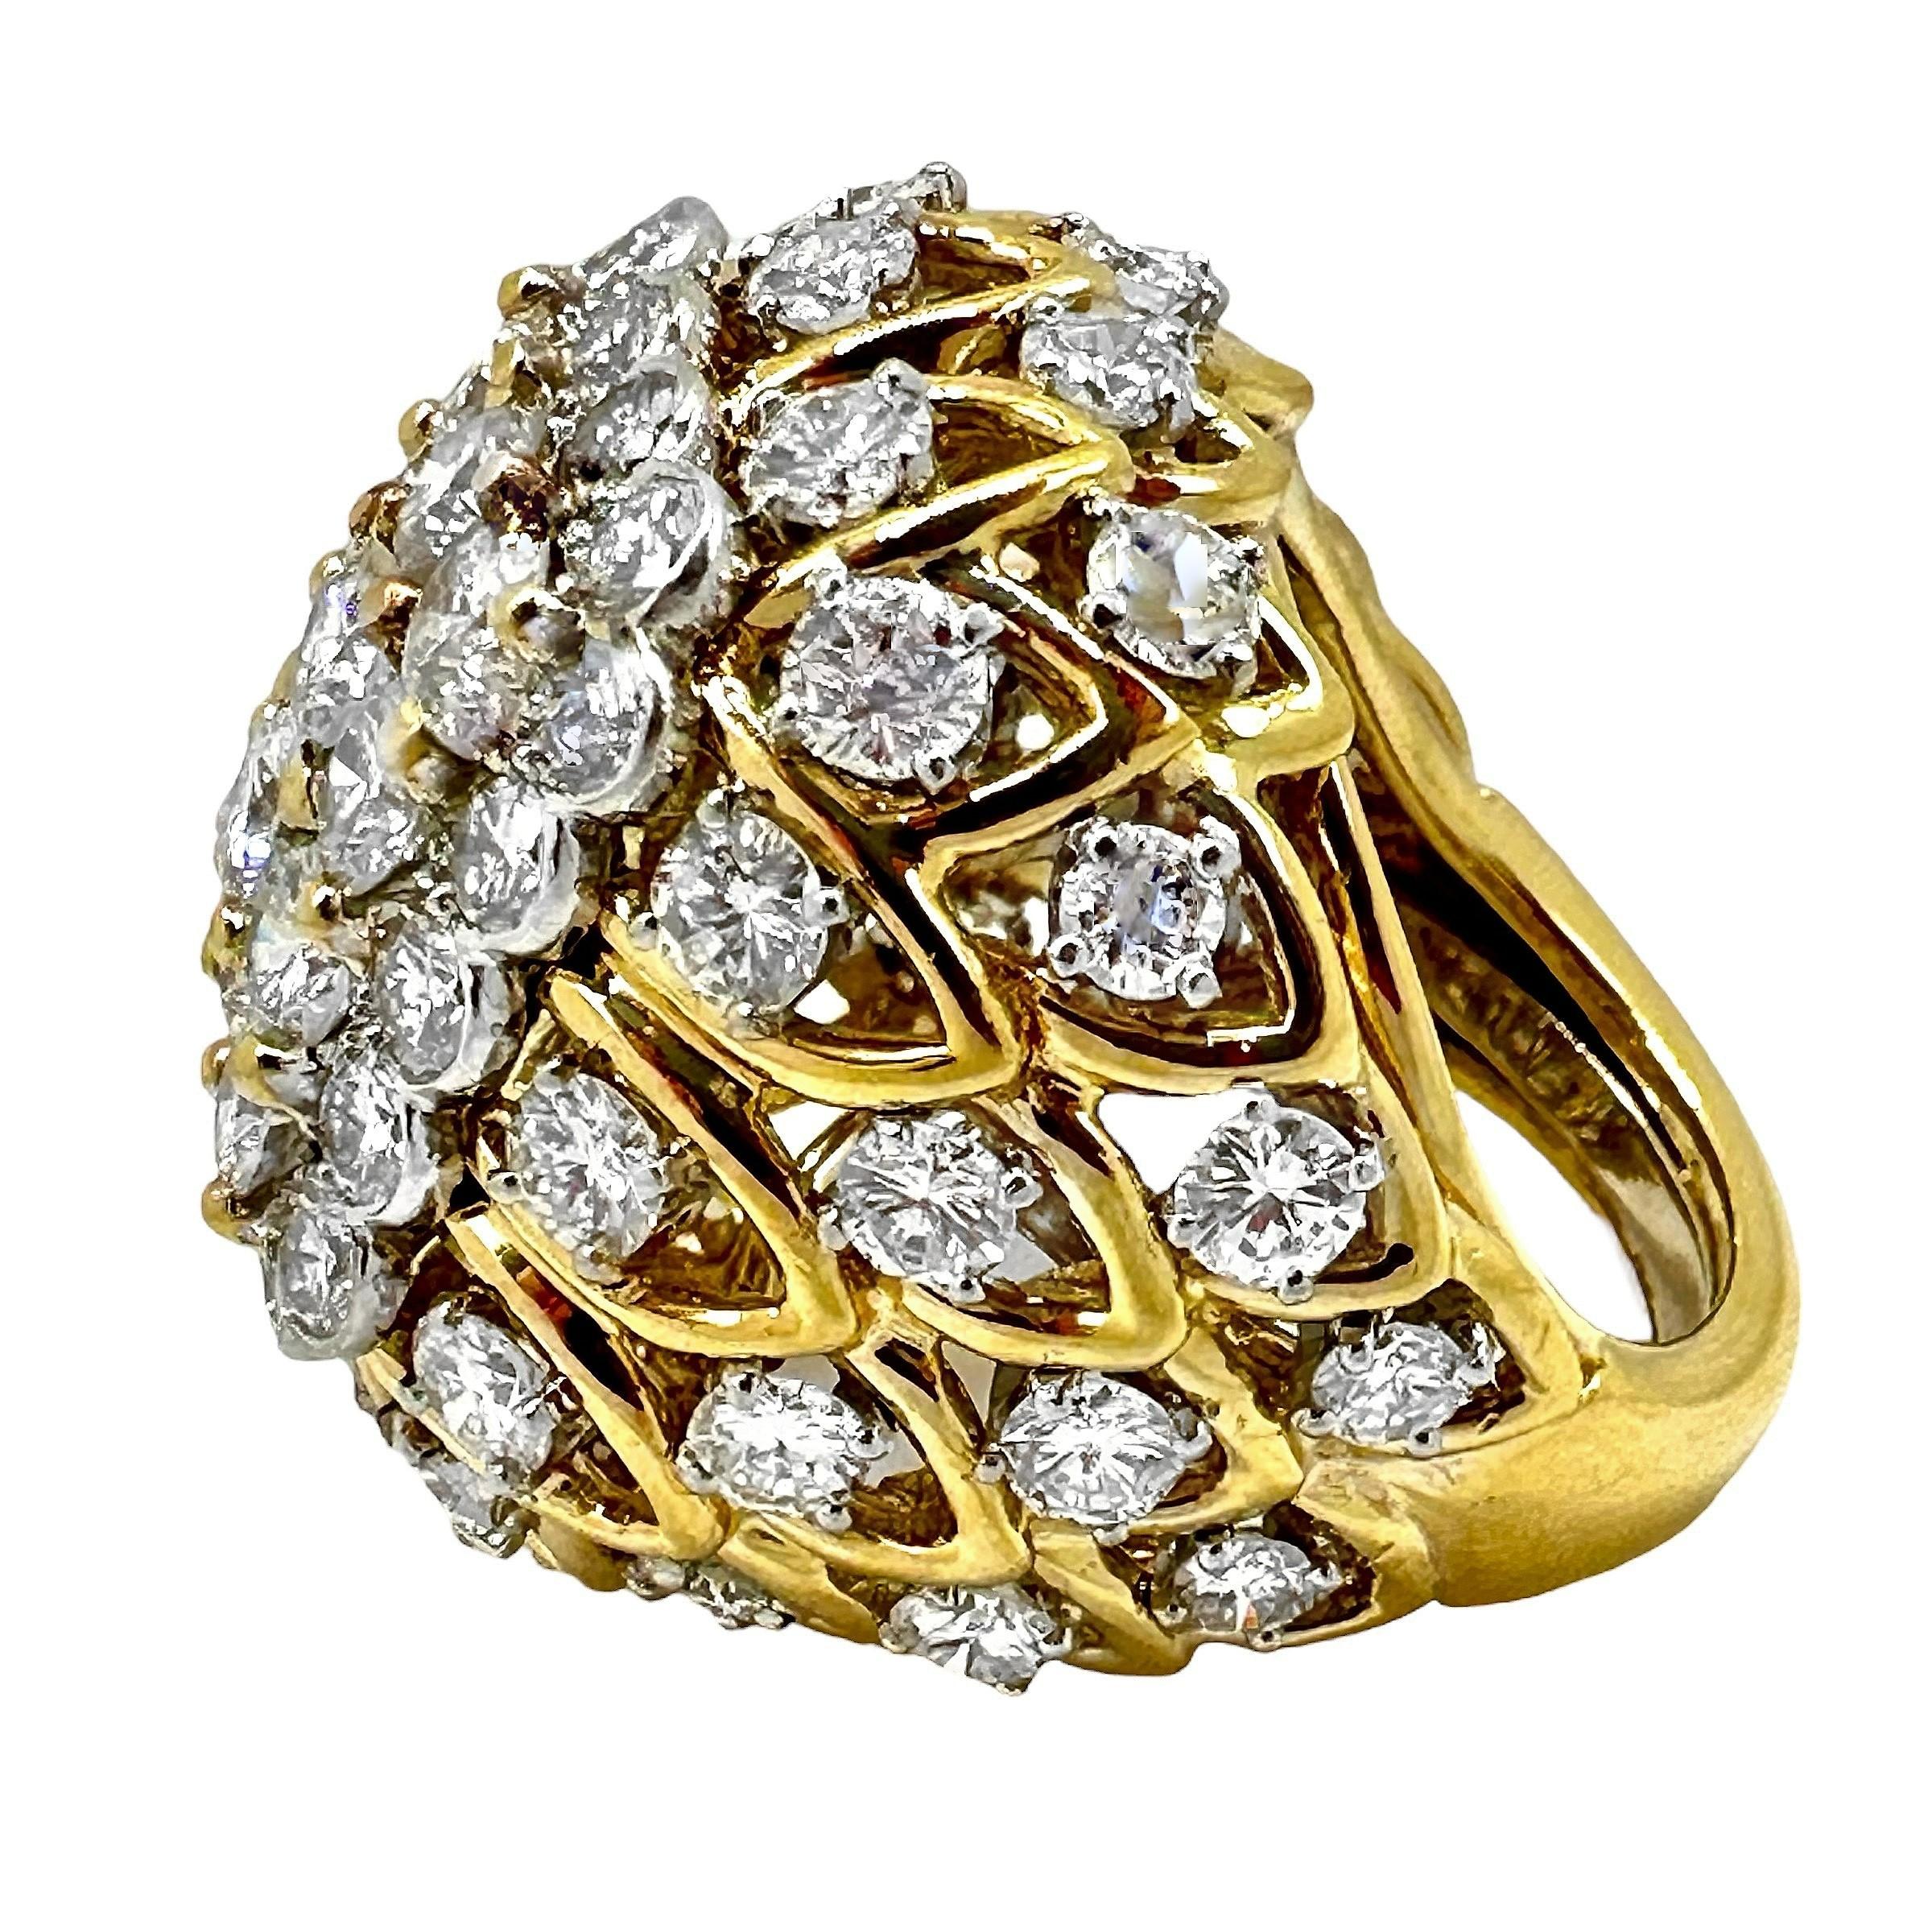 Modern Large Scale 1970s Diamond Platinum and Gold Cocktail Ring 8.5carats Total For Sale